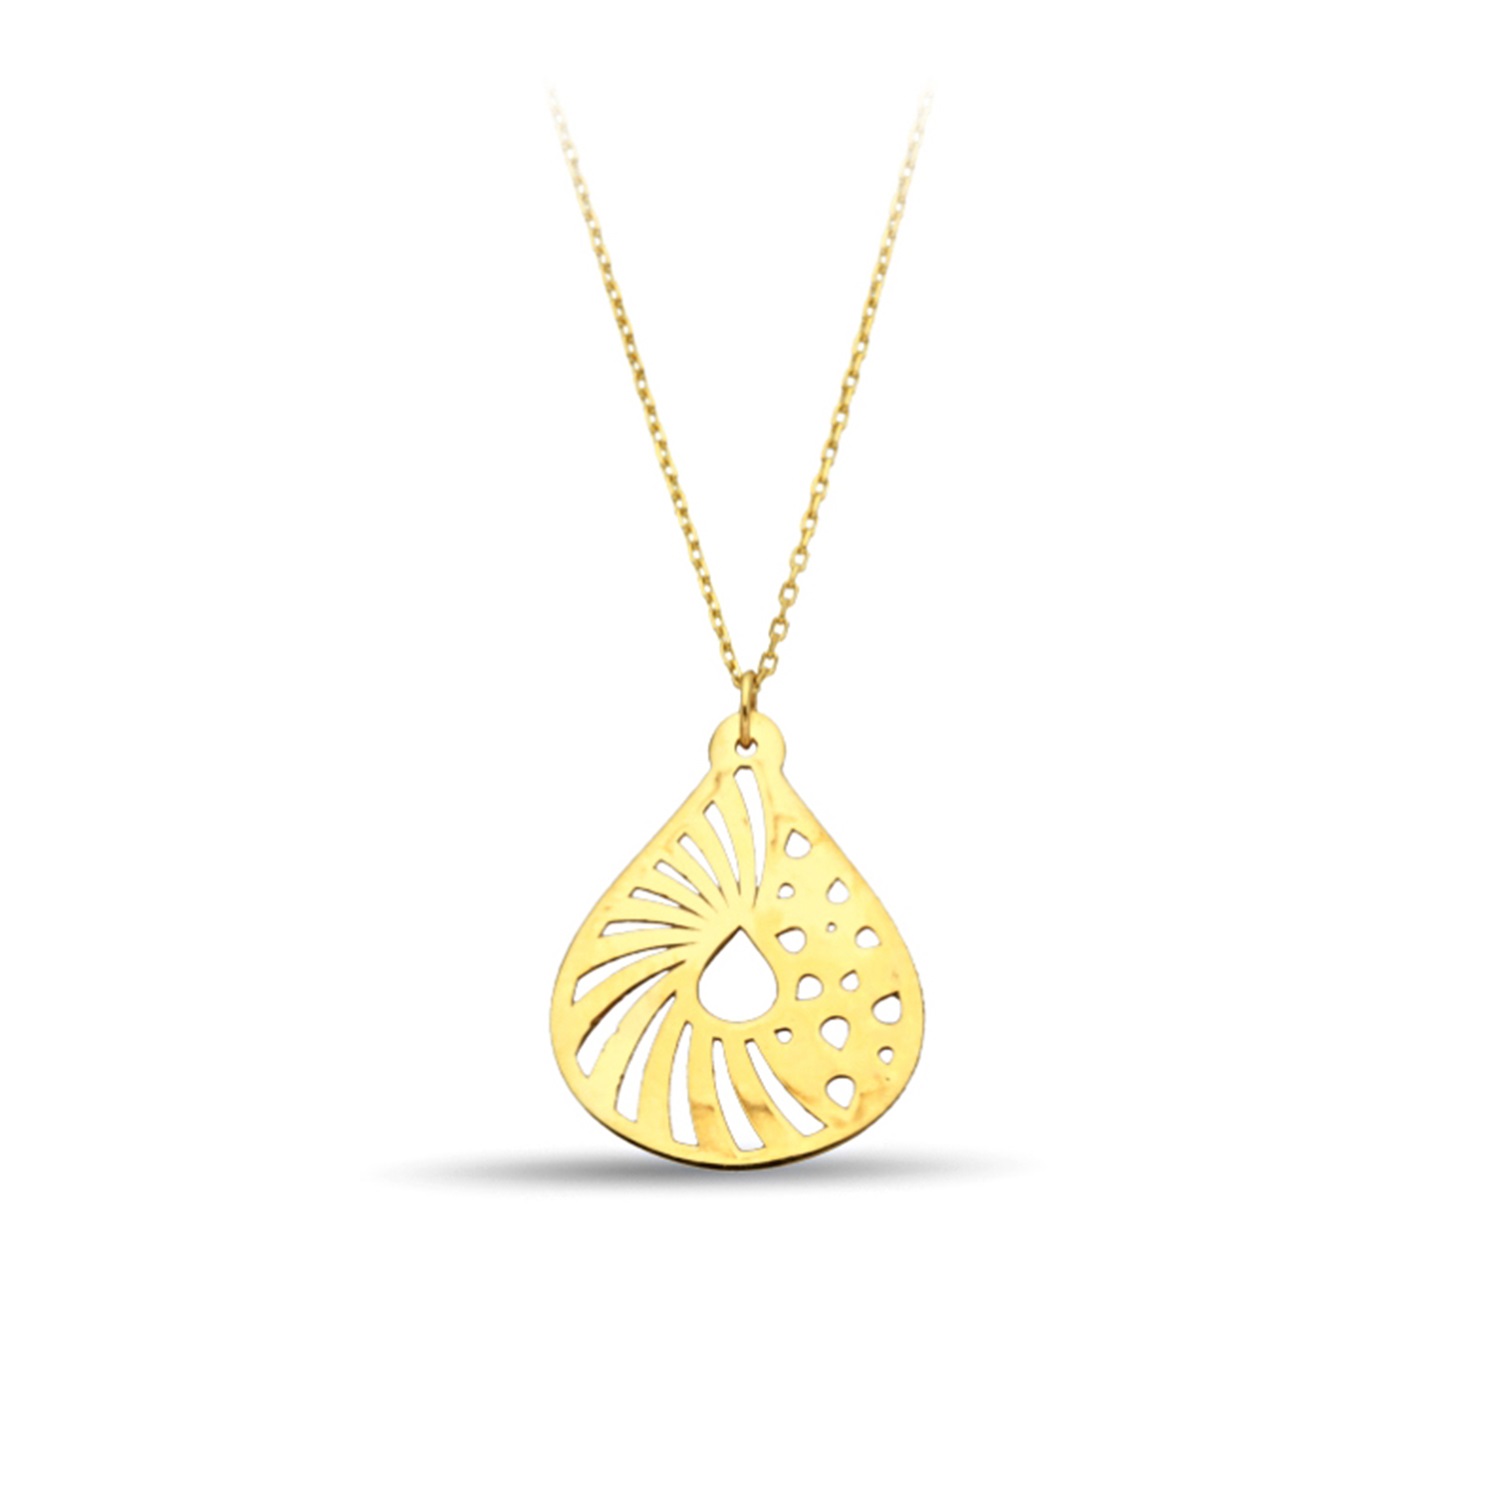 Patterned Pear Gold Necklace